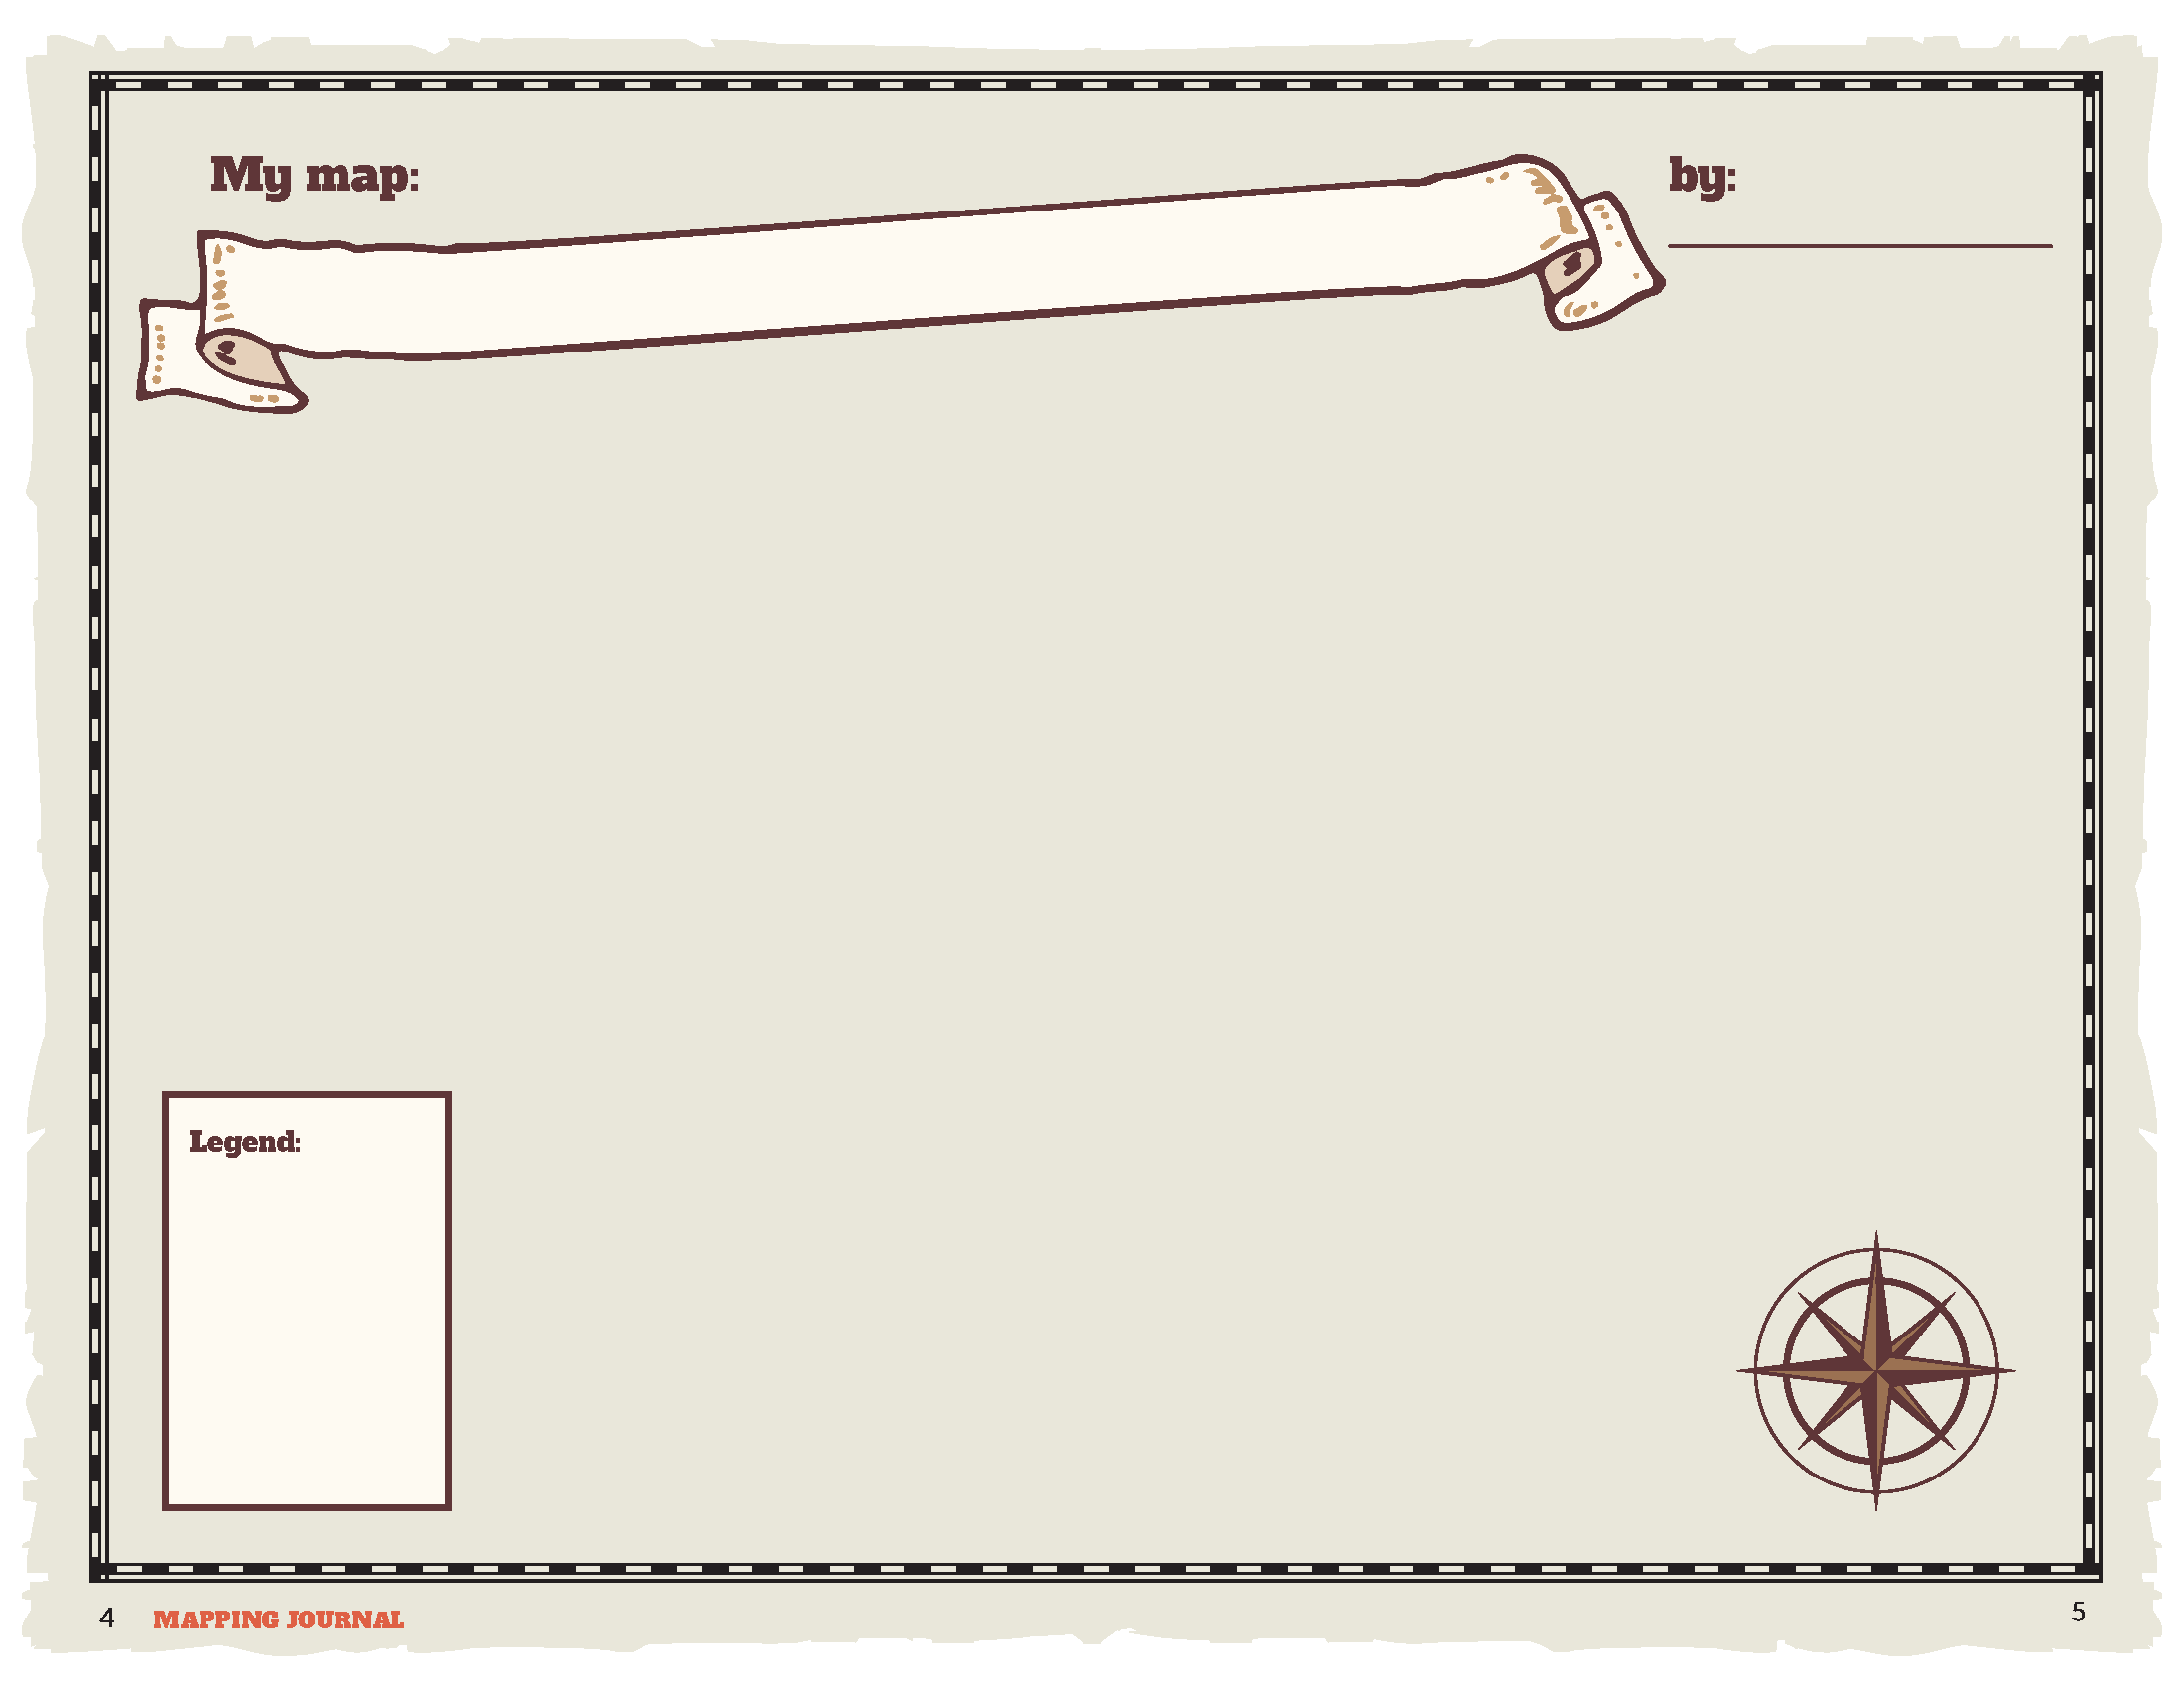 page for learners to draw their own map with blank legend box and compass rose images